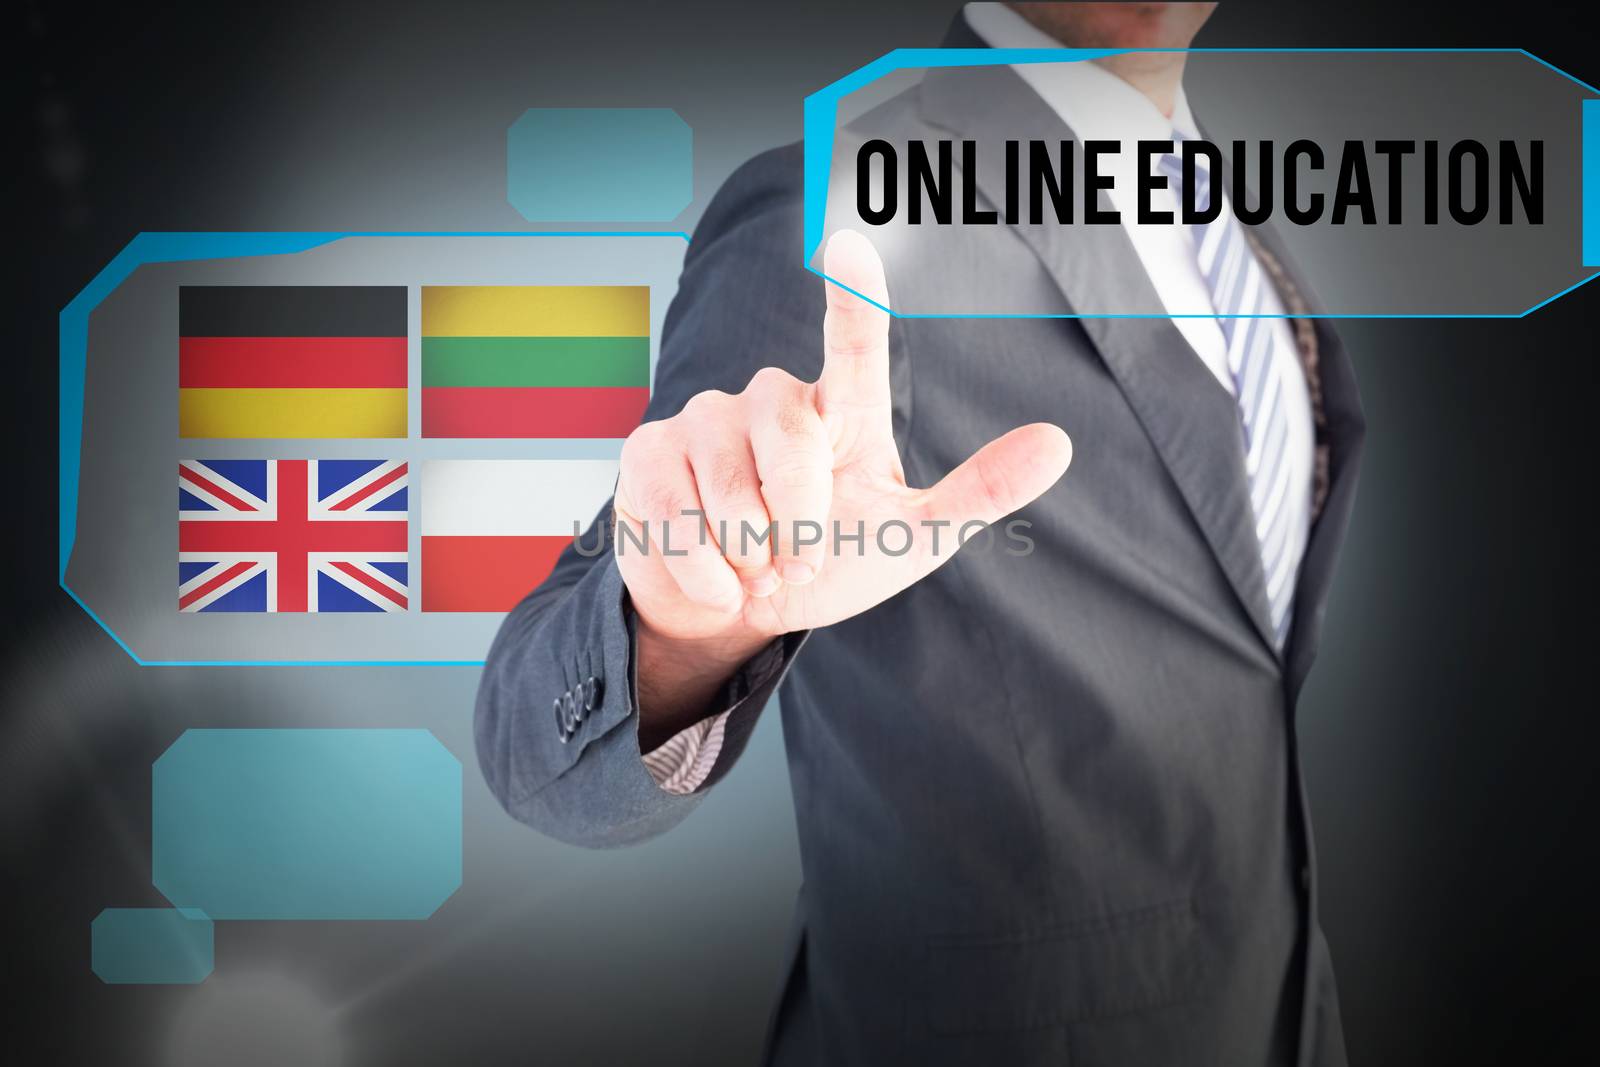 Online education against blue background with vignette by Wavebreakmedia